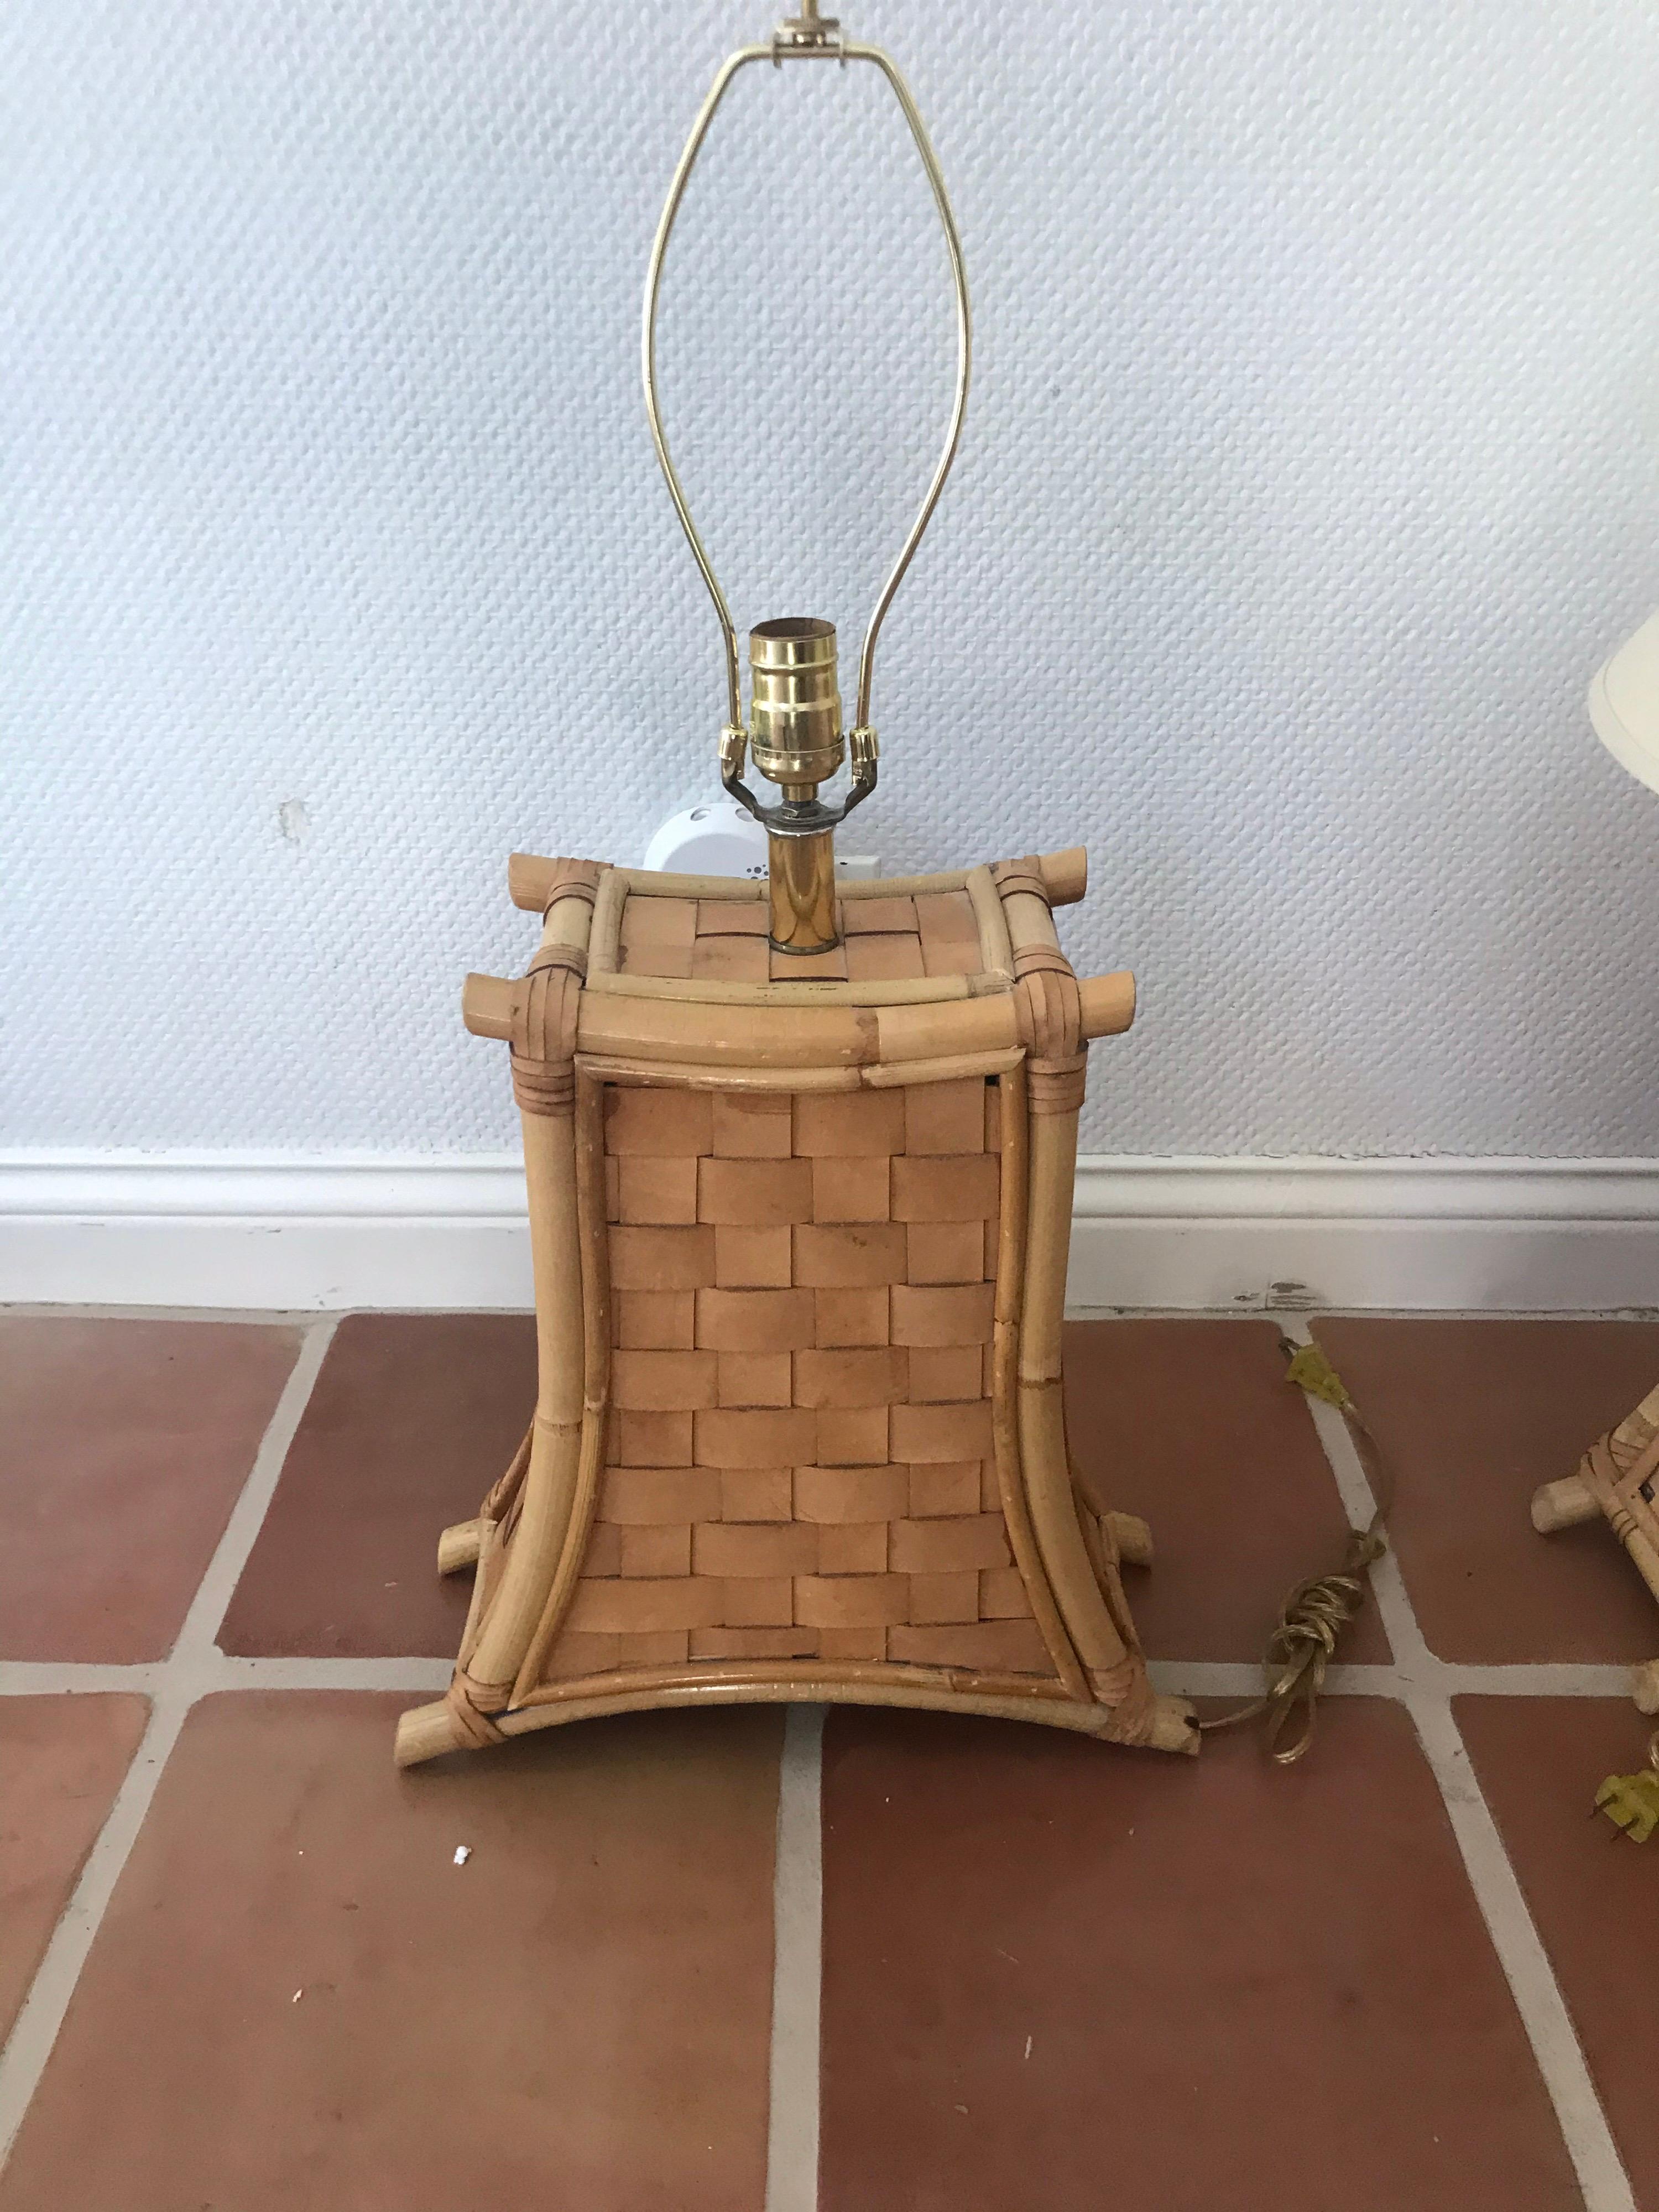 This is a pair of vintage bamboo and leather strap lamps, probably from the 1970s-1980s.
The lamps are in great condition and have a Hollywood Regency feel.